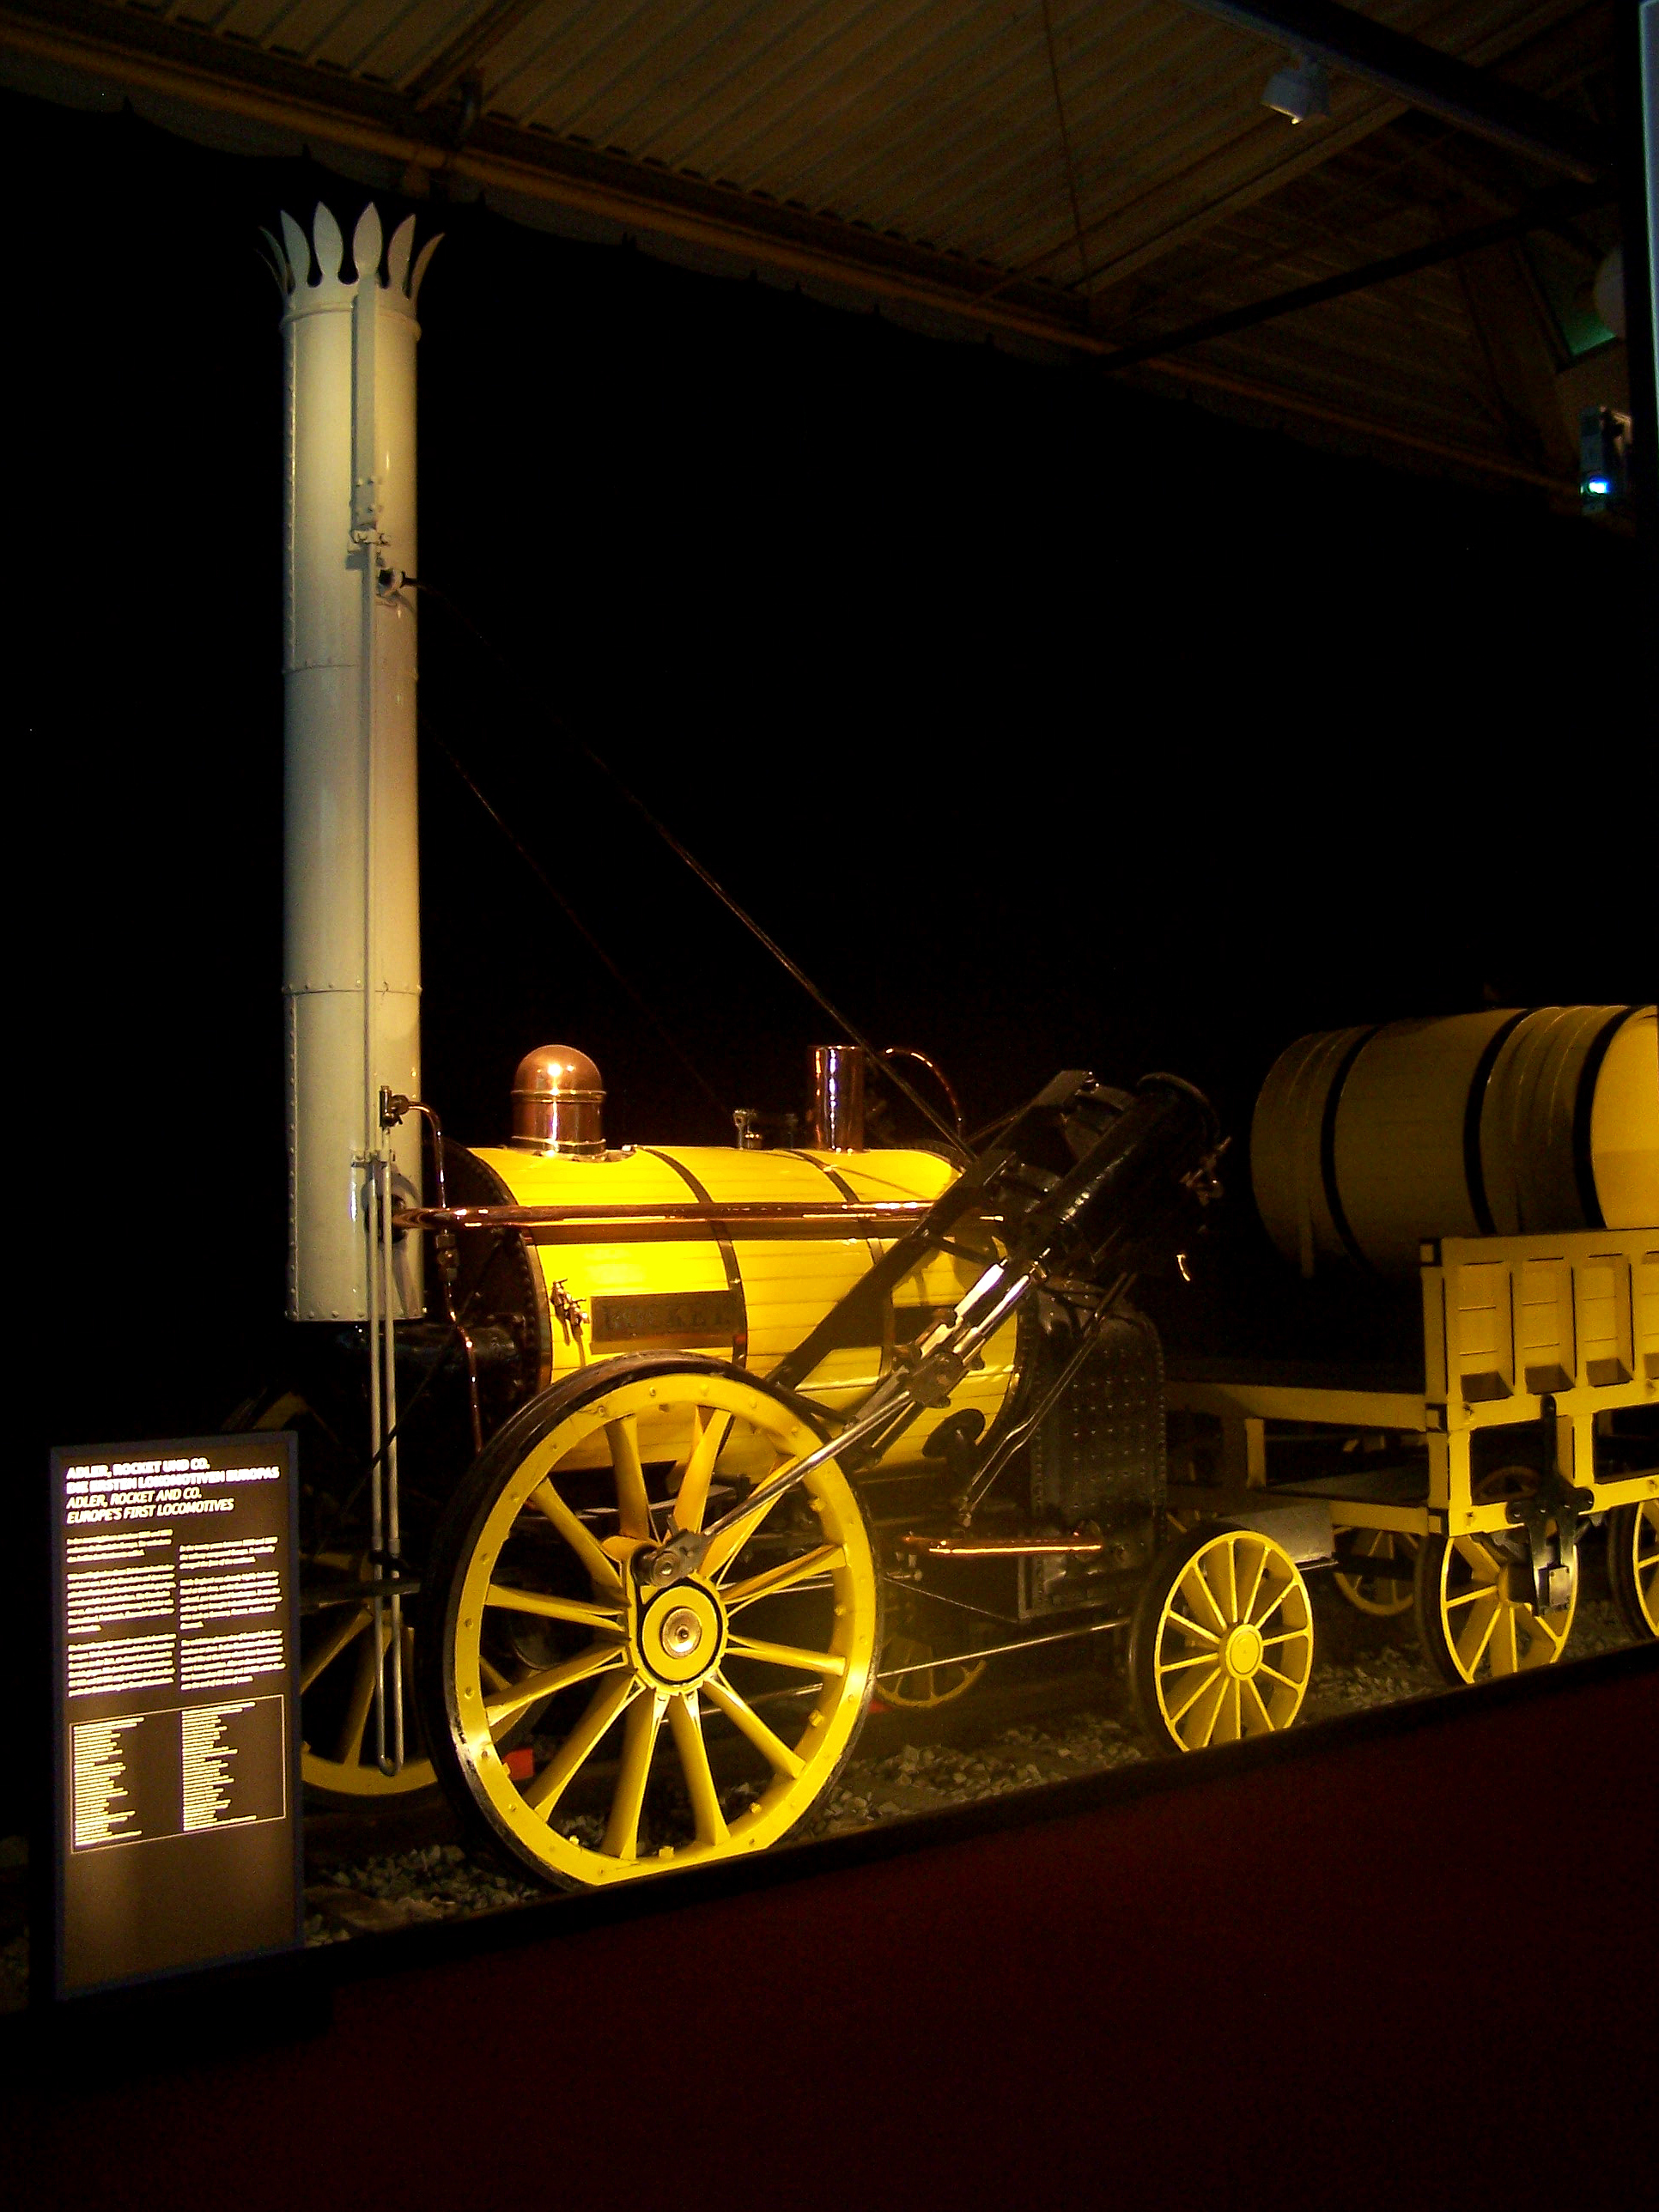 Replica from 1935 of the historic steam locomotive Rocket as it appeared at the time of the L&M's opening, in the Transport Museum in Nuremberg in the exhibition 